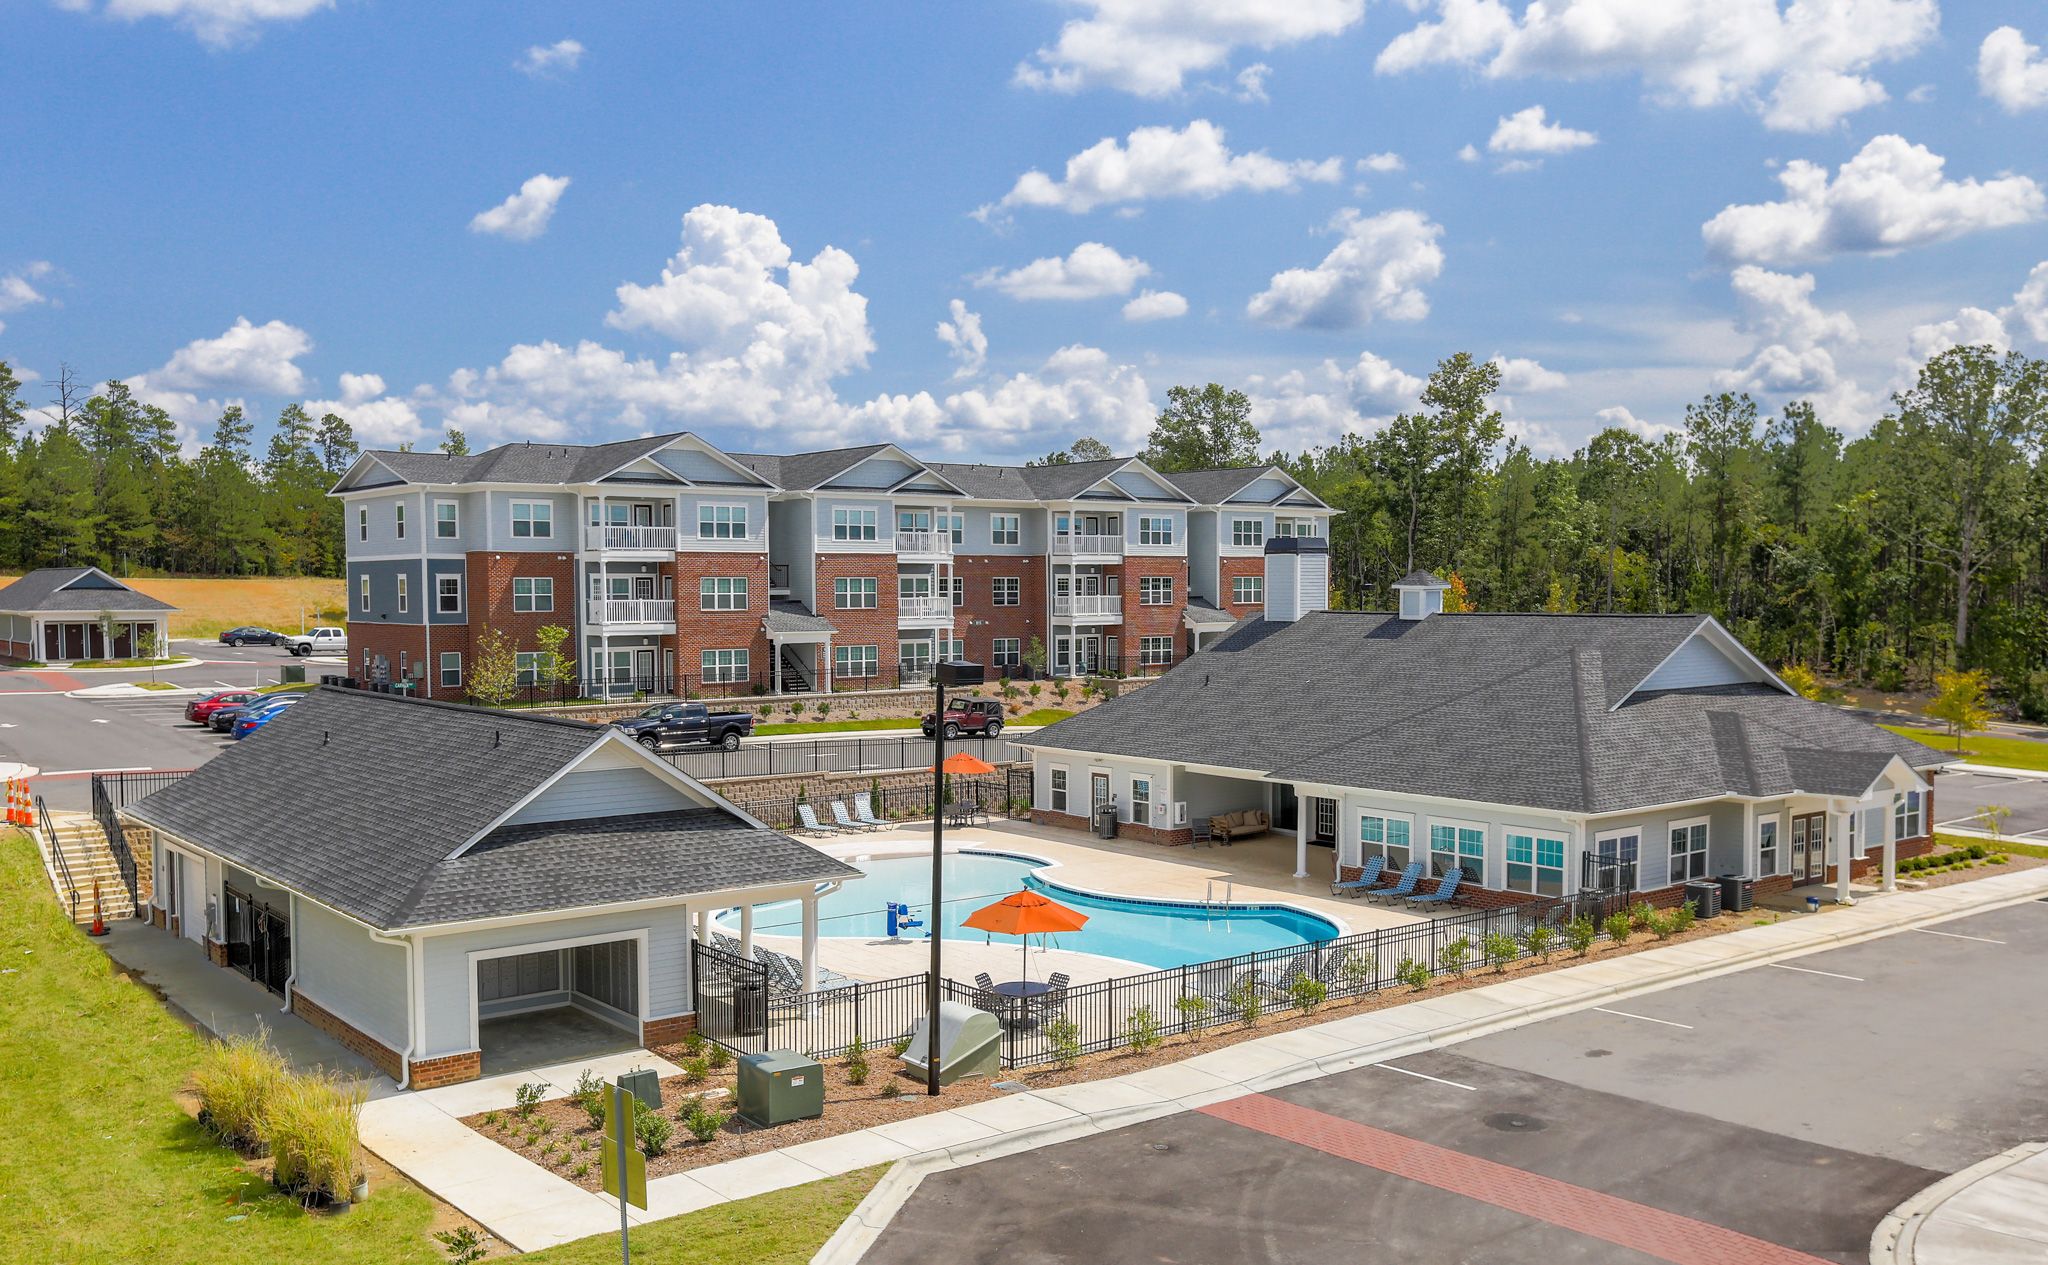 Commercial Photography Waterford Terrace Apartments Rock Hill NC